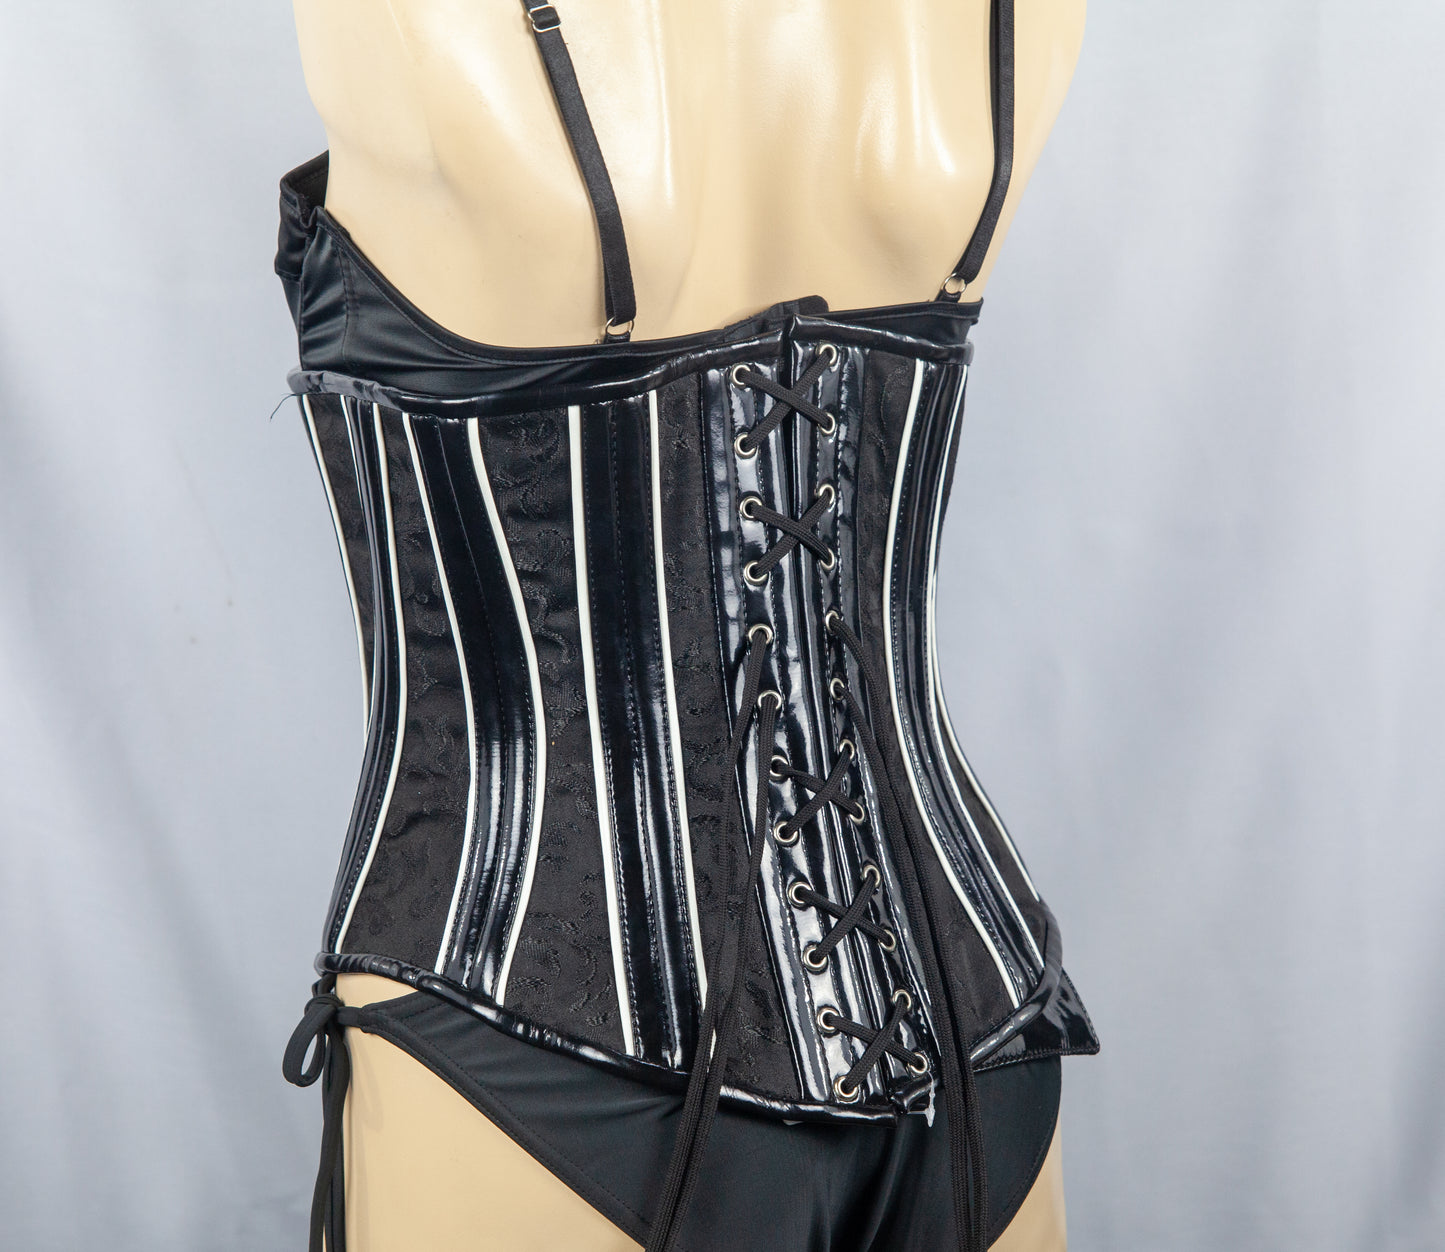 Corset - Black Brocade with Black & White Synthetic Leather